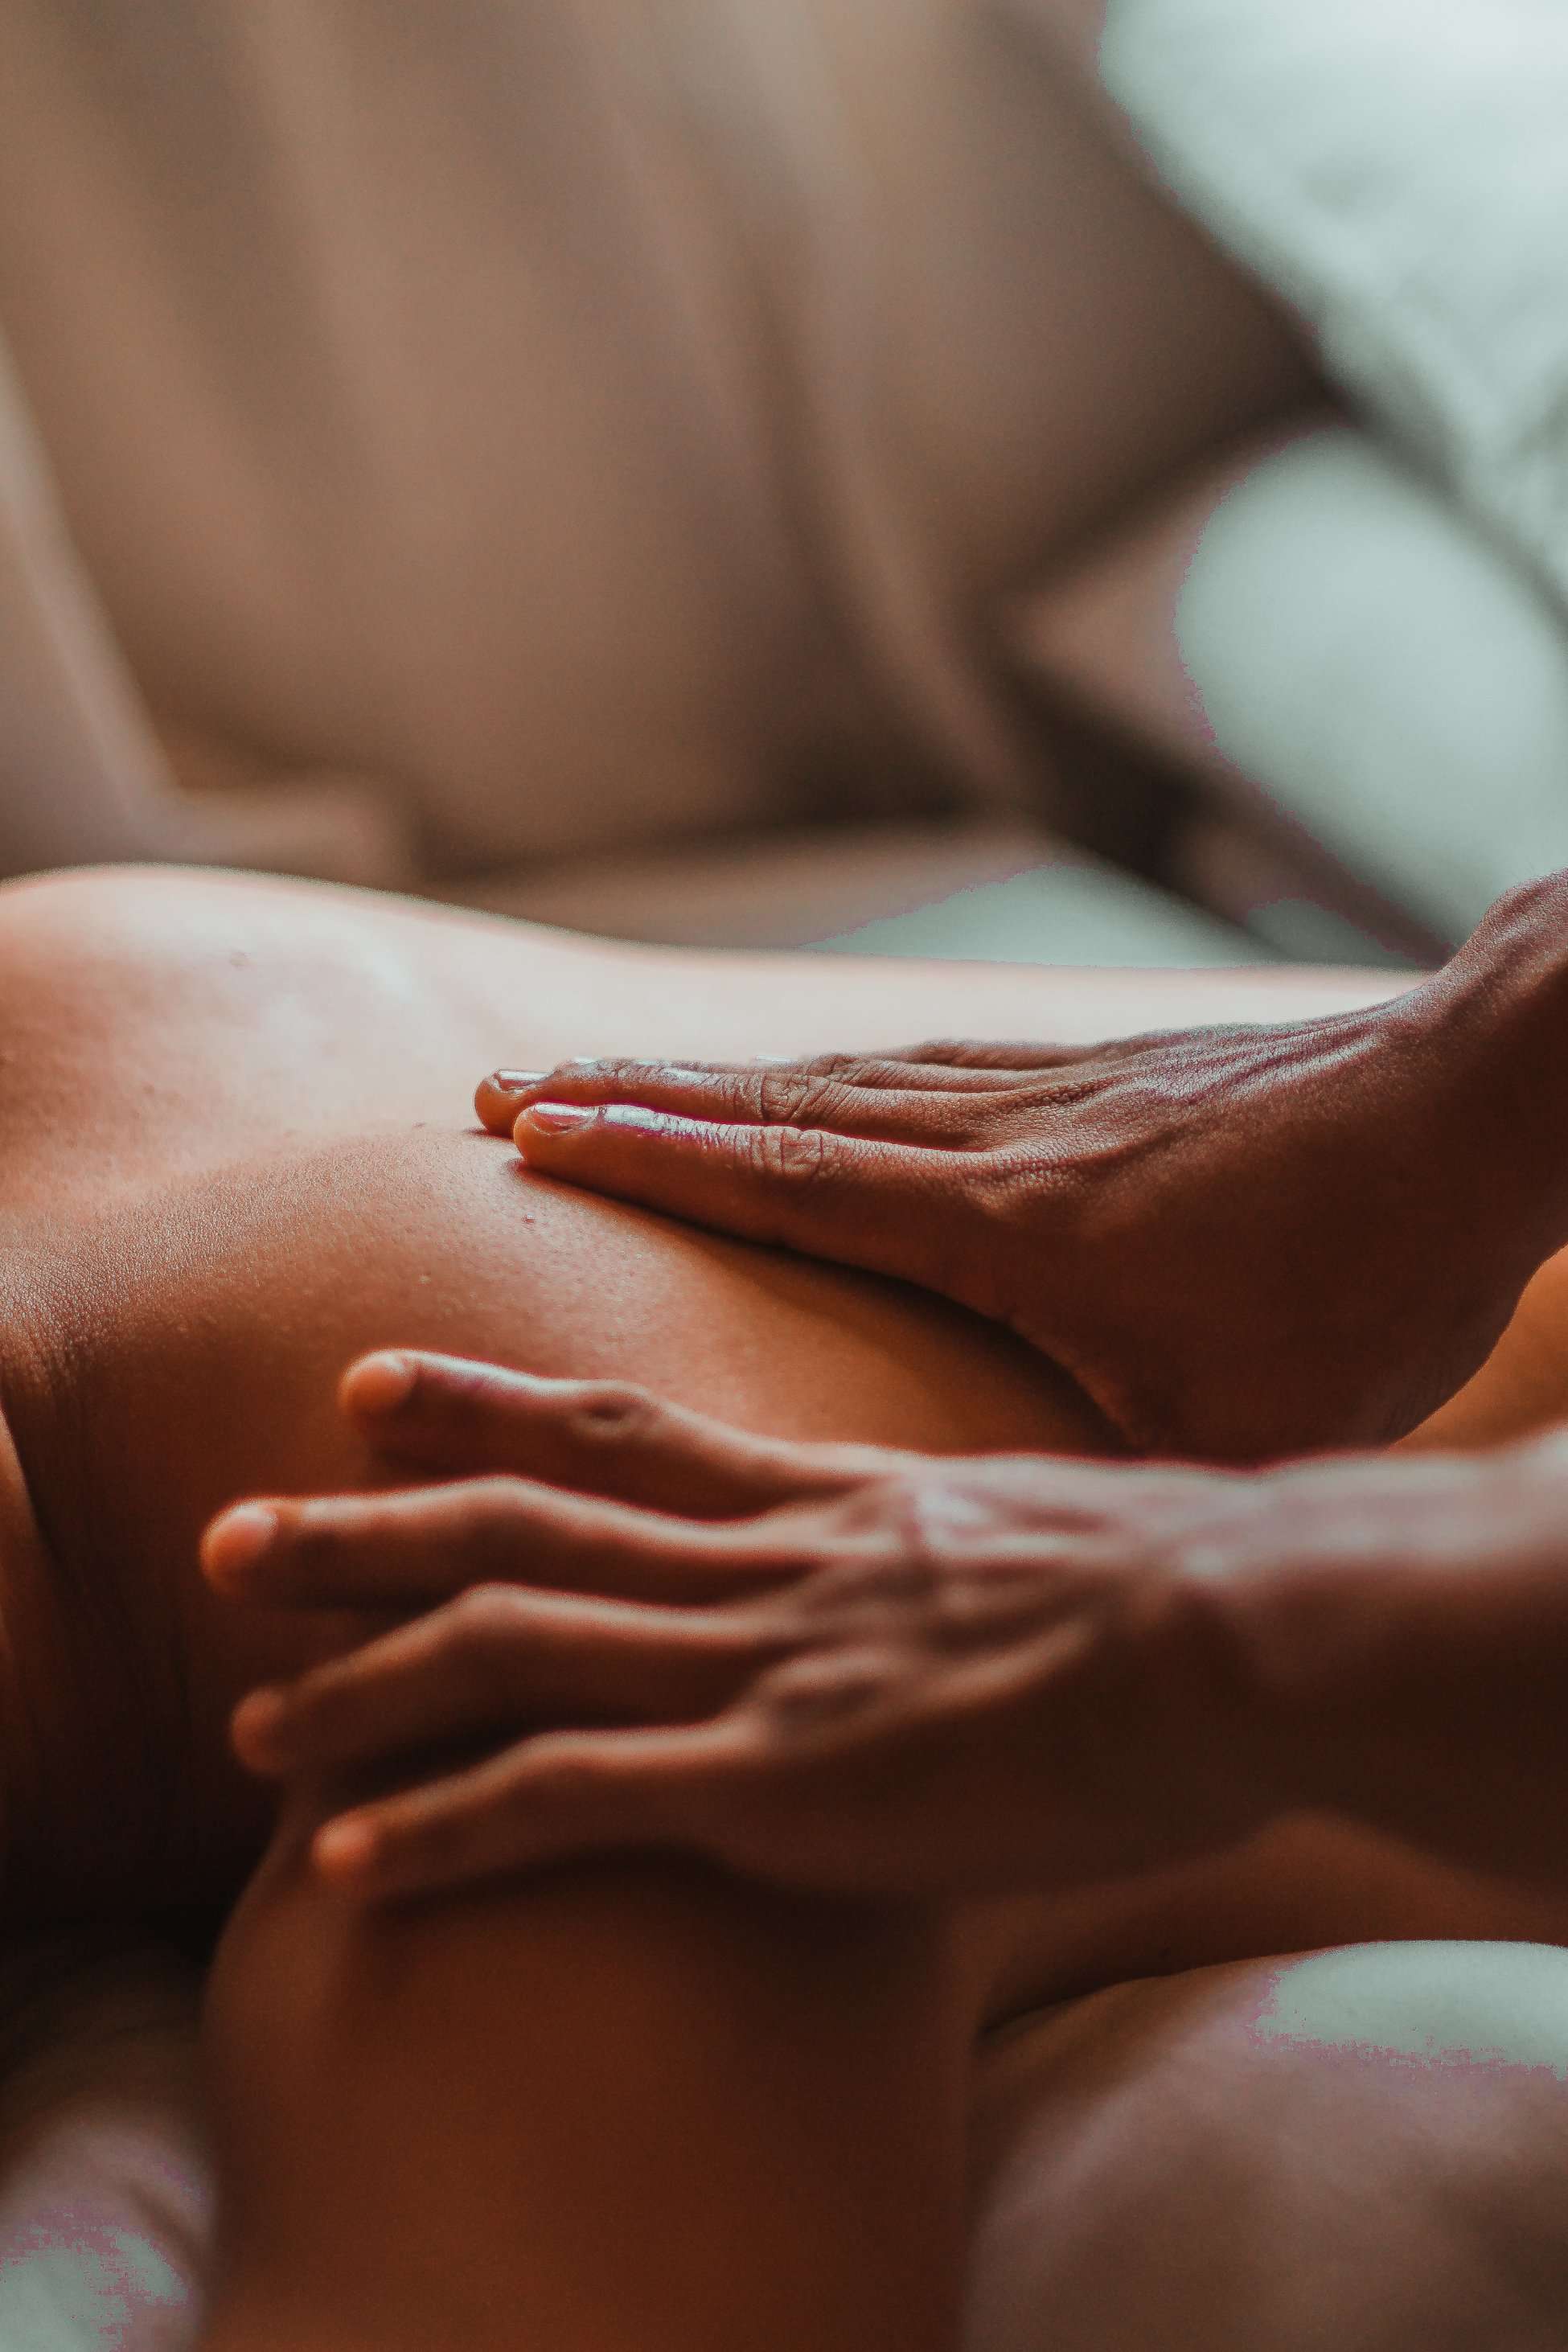 massage can benefit your immune system